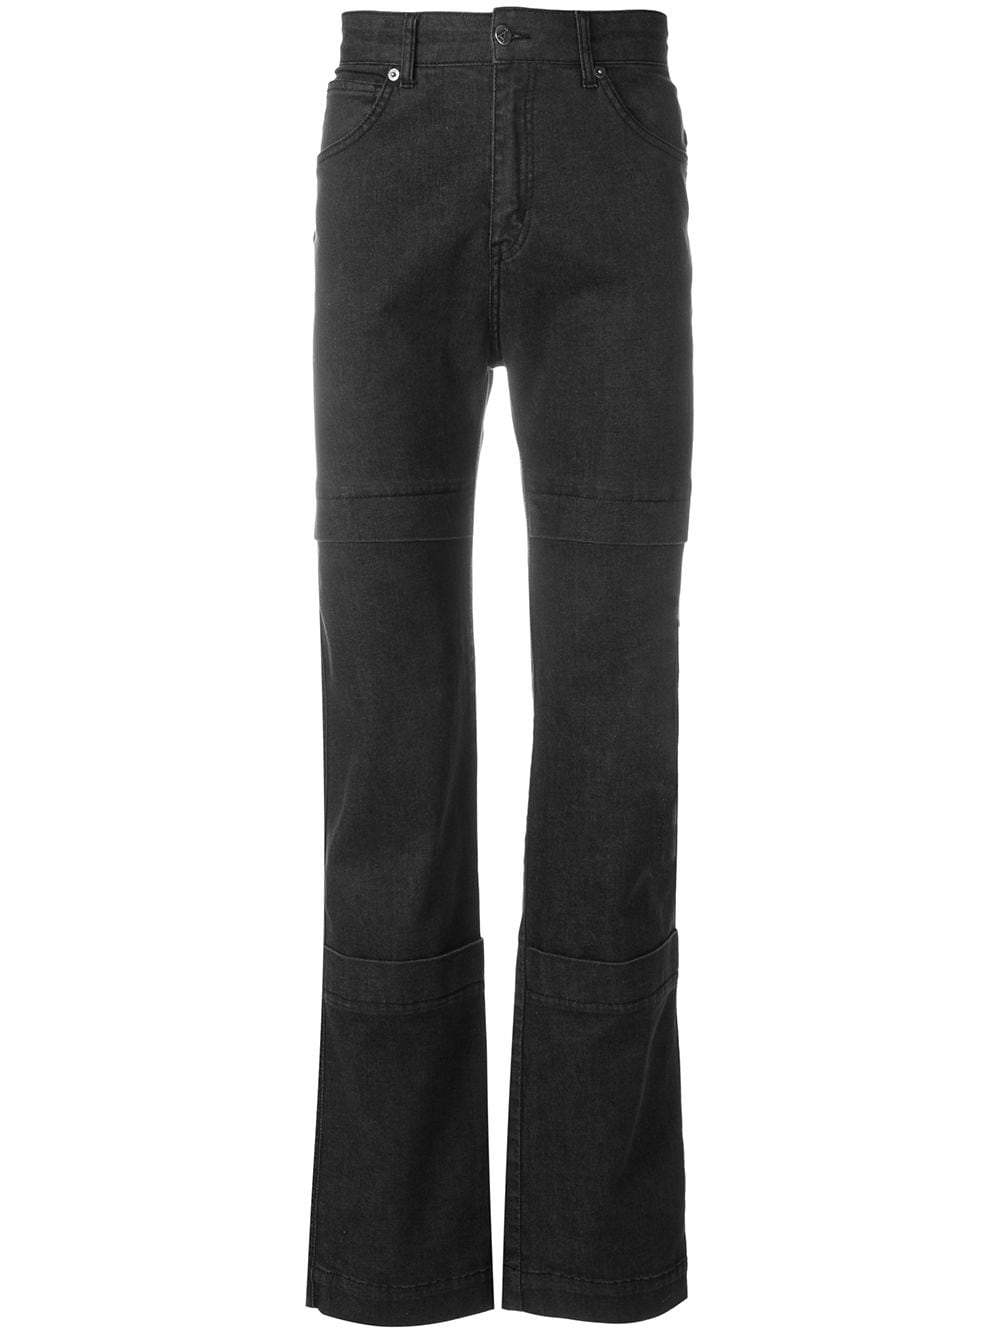 DAVID CATALAN workwear trousers,DCSS18TROUSERS0212915046